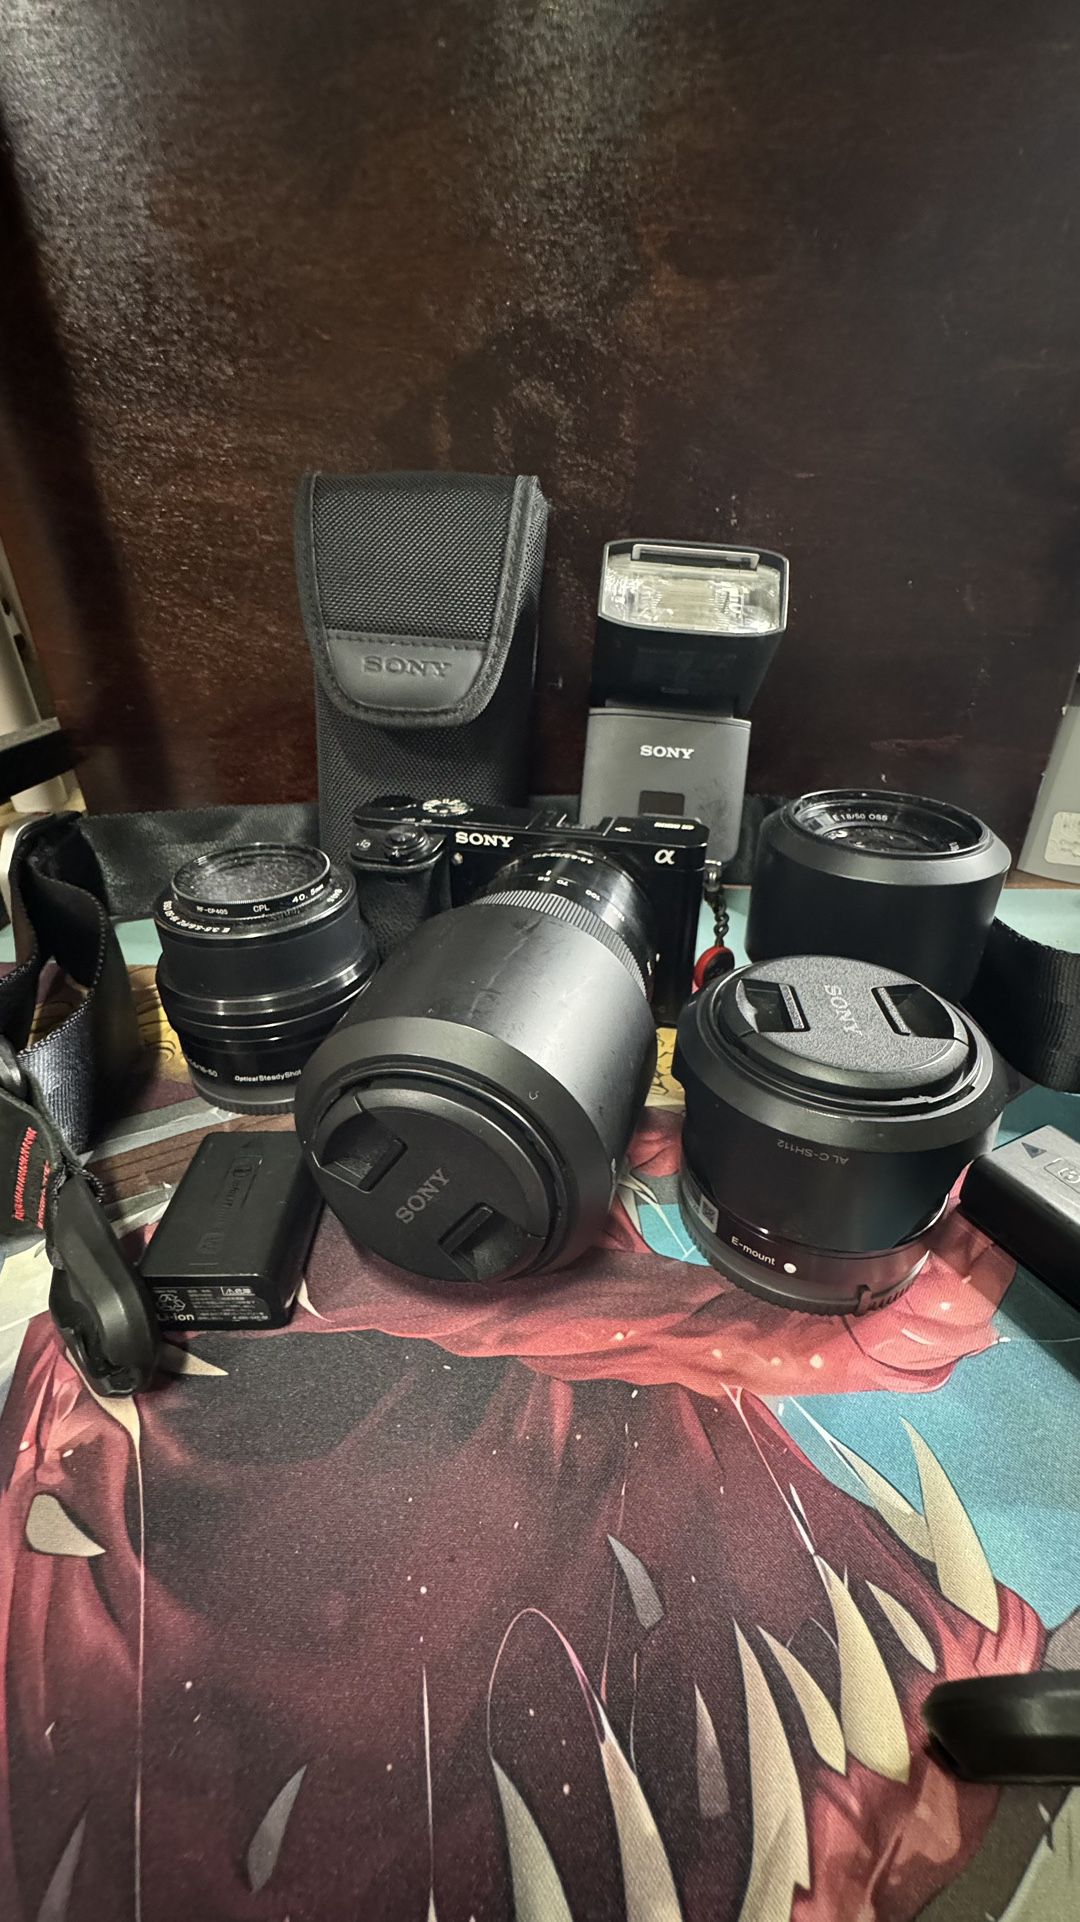 Sony A6000 + Lenses, External Flash, And Carrying Bag